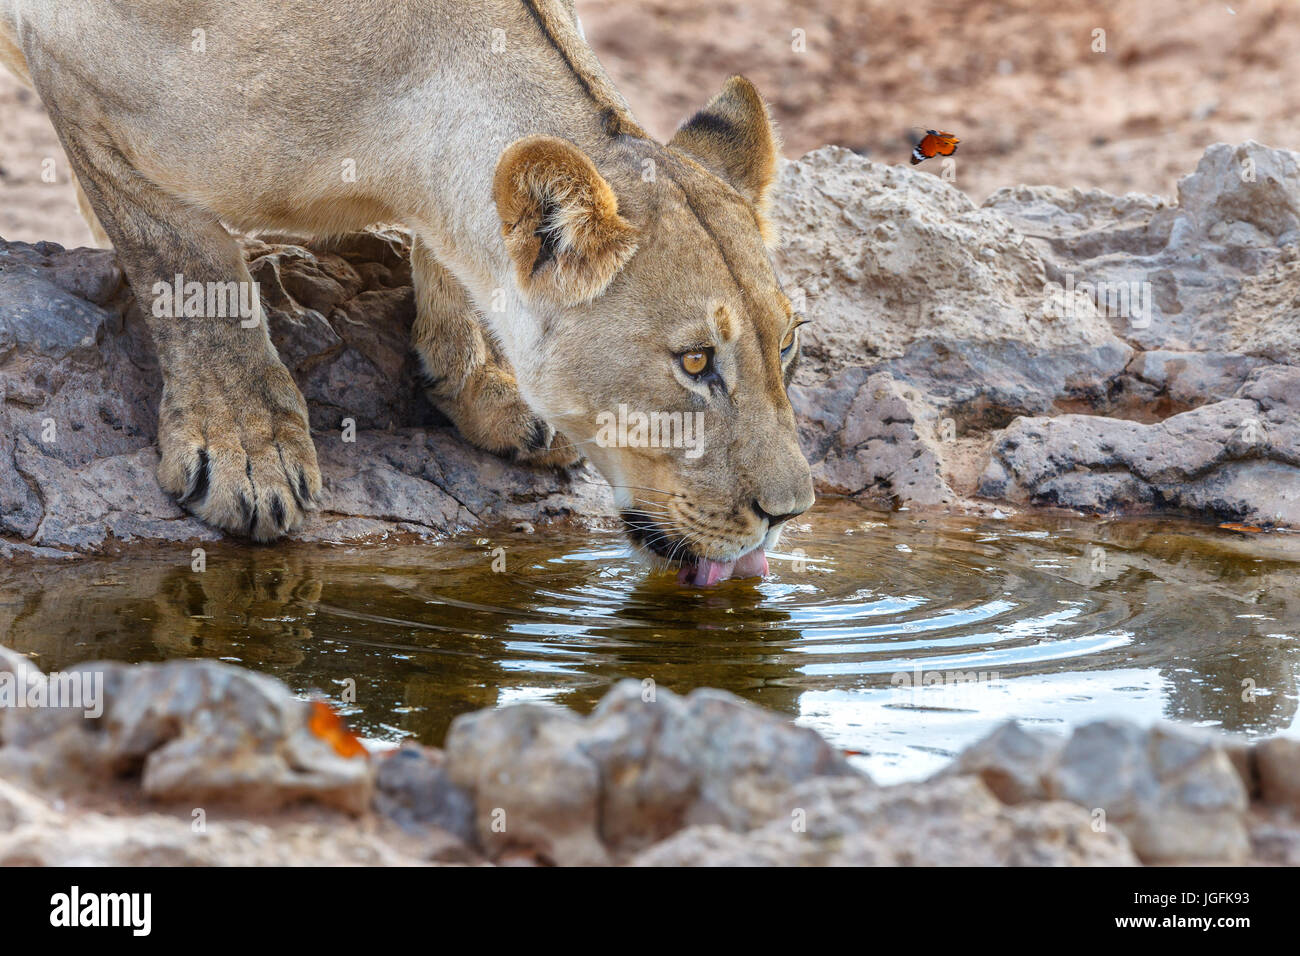 Lion, Panthera leo, lapping water at a waterhole in the Kgalagadi Transfrontier Park always vigilant with a butterfly for company Stock Photo